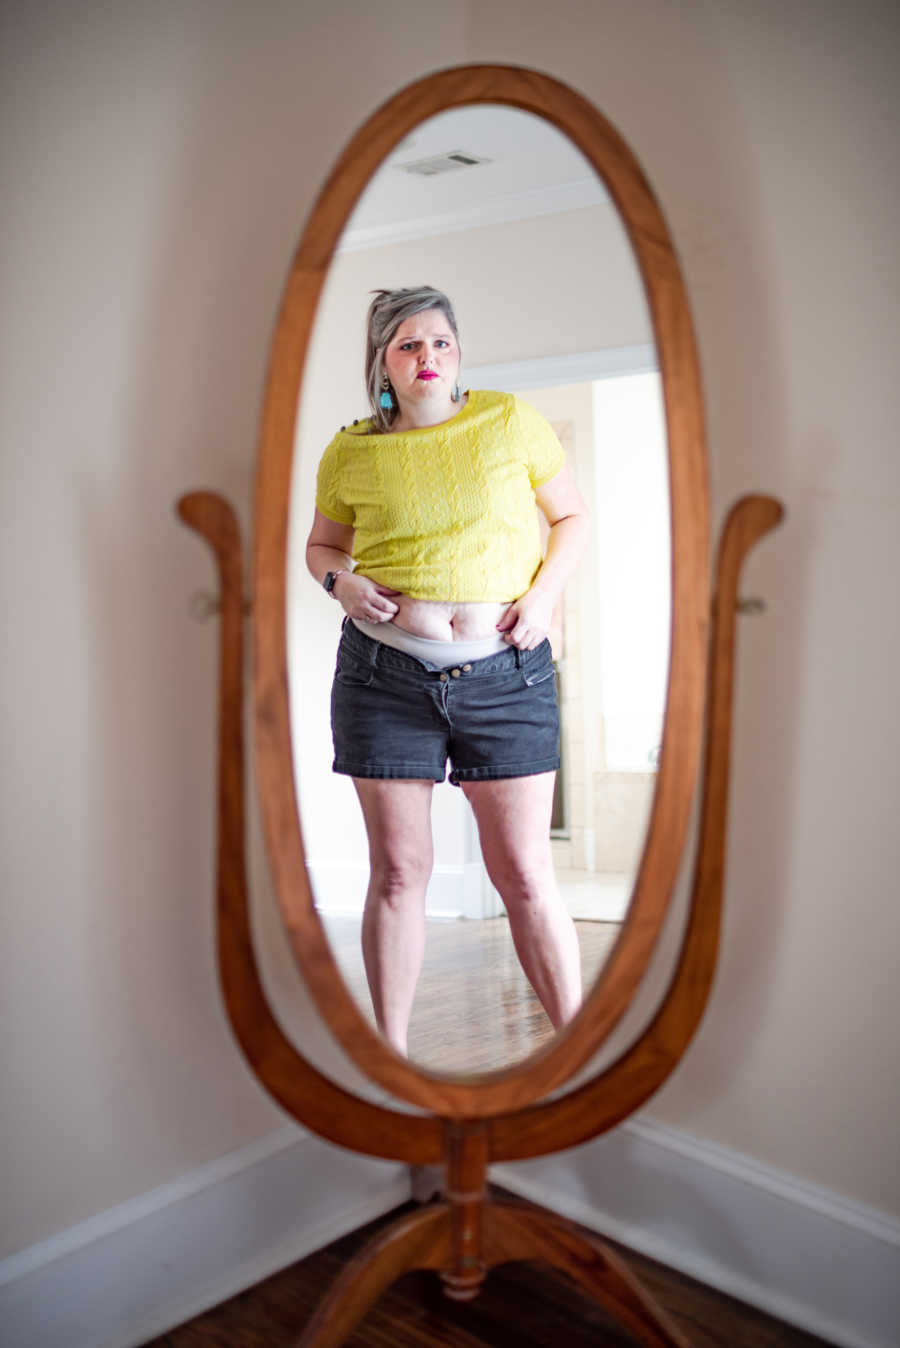 Mother who is hard on herself for her weight looks at herself in mirror with her stomach exposed